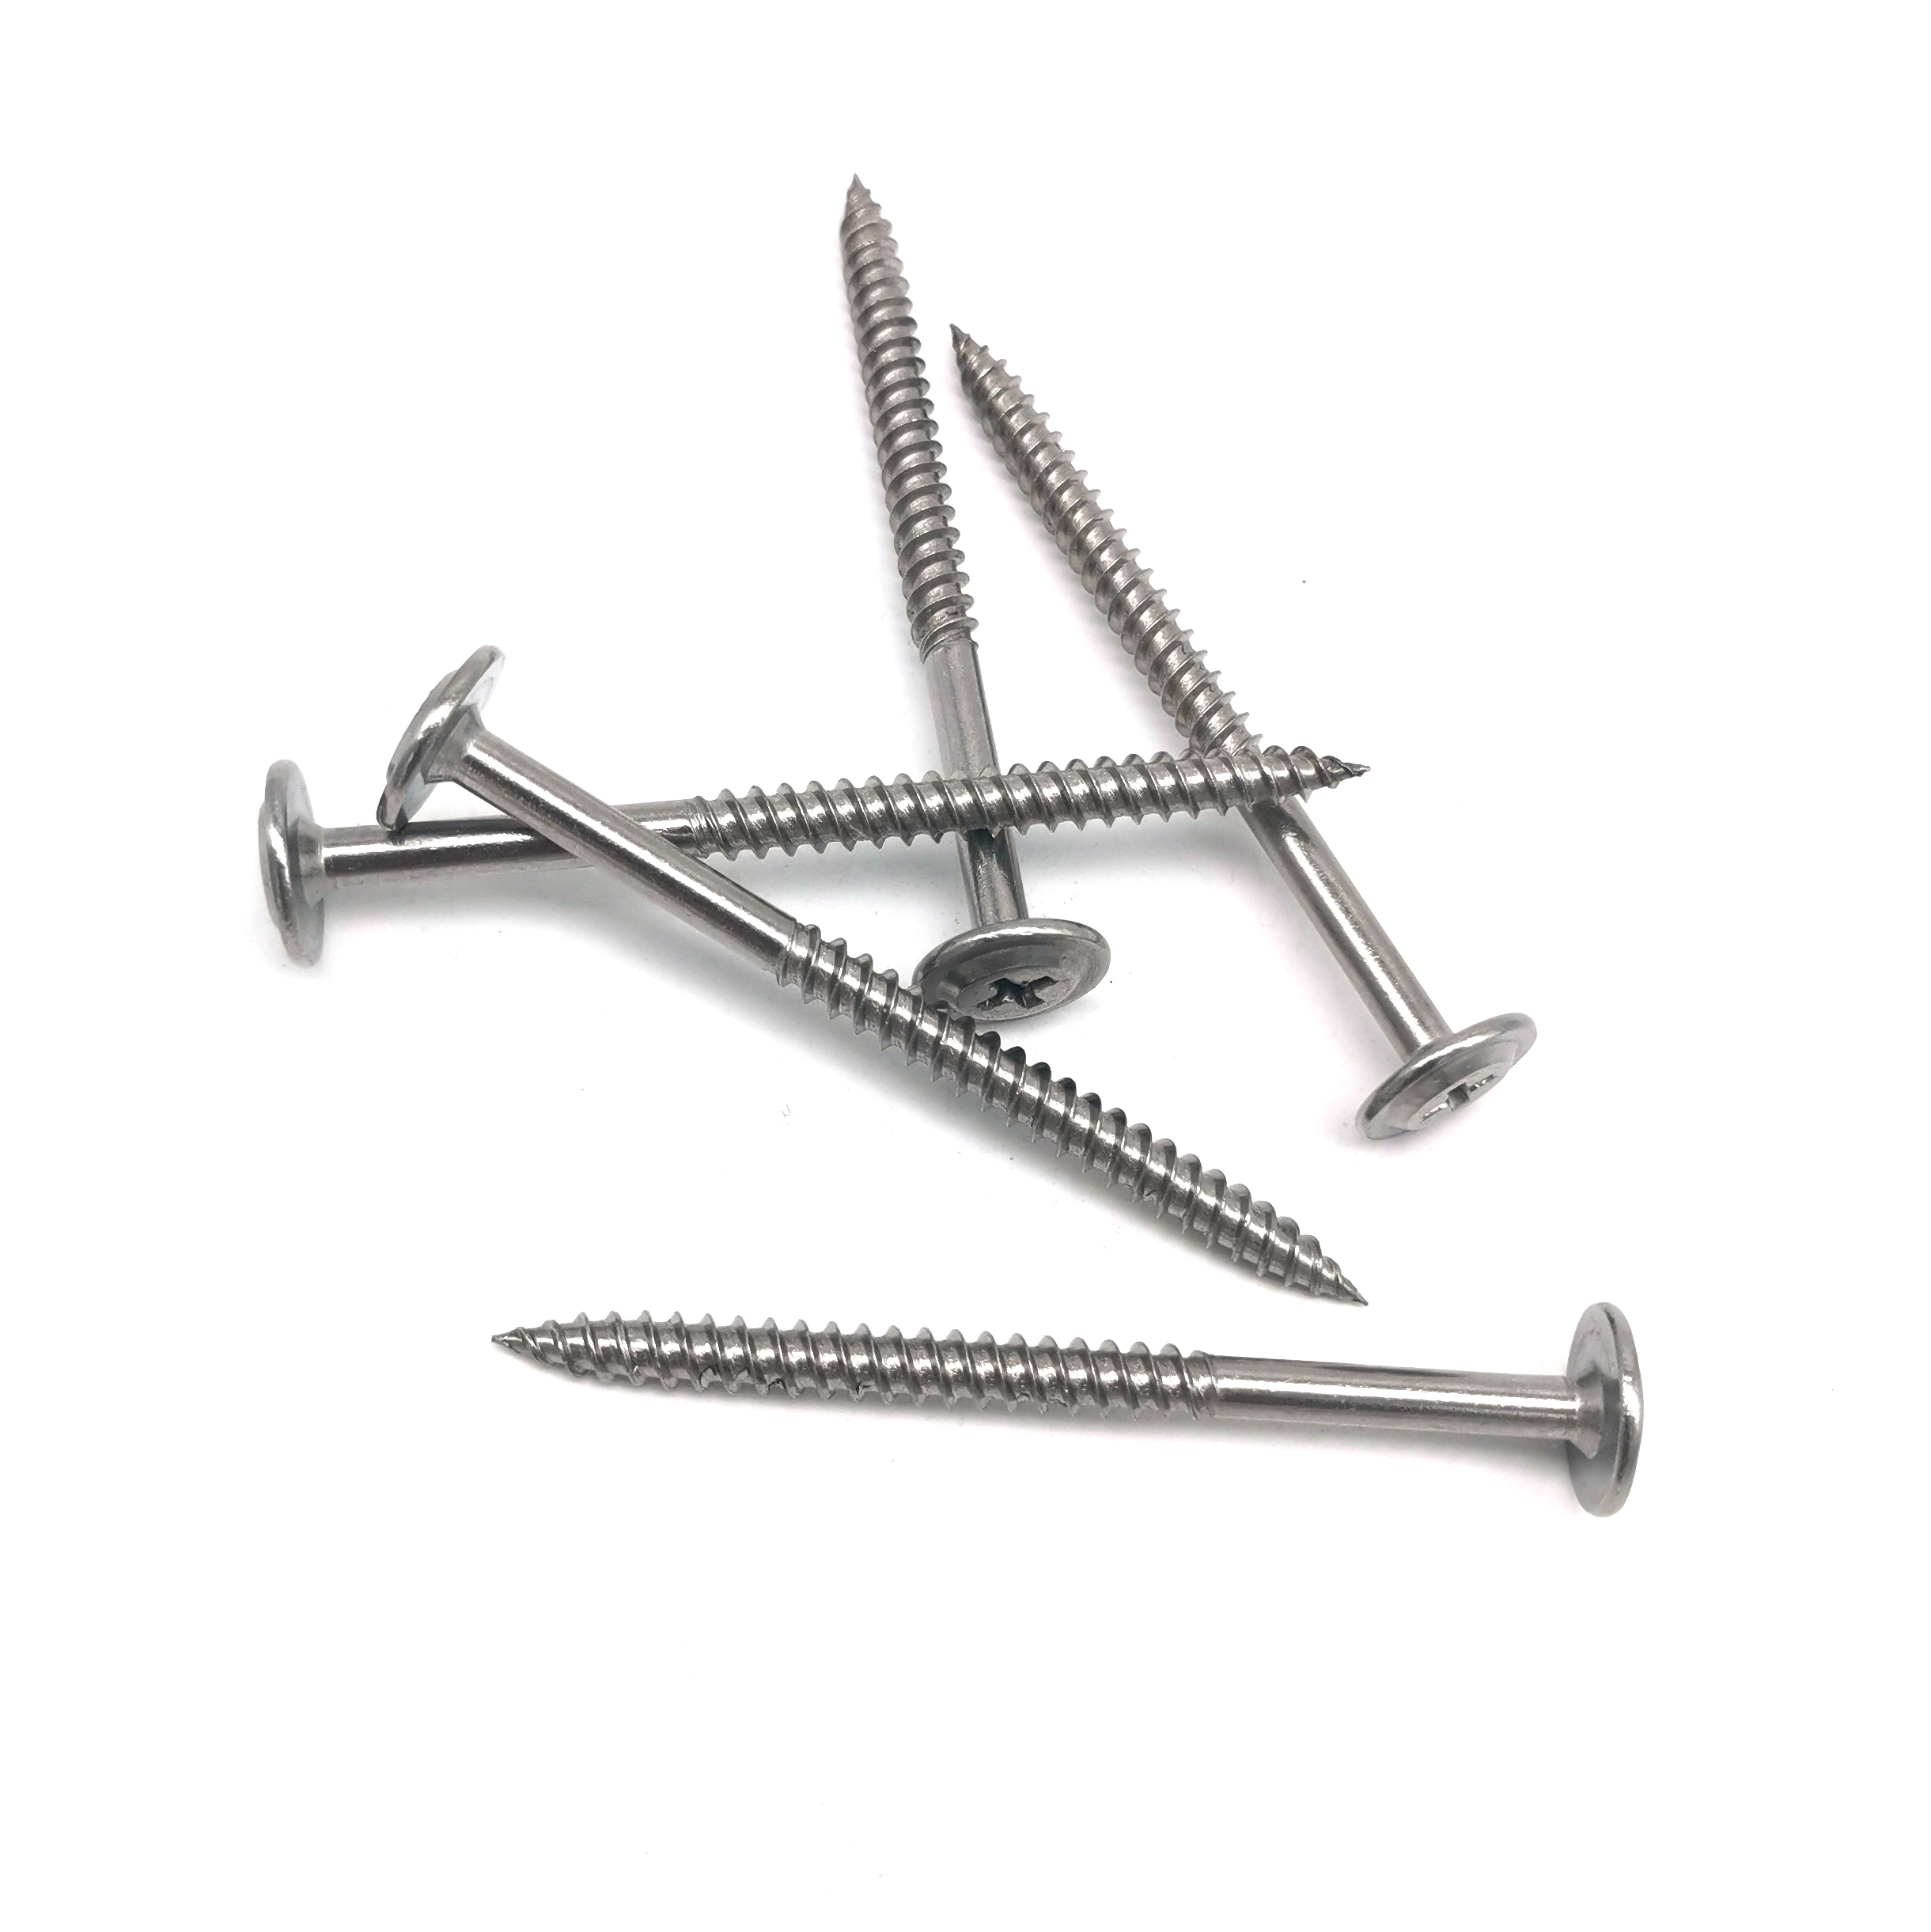 304/316/316L Stainless Steel Machine Self Tapping/drilling Screw